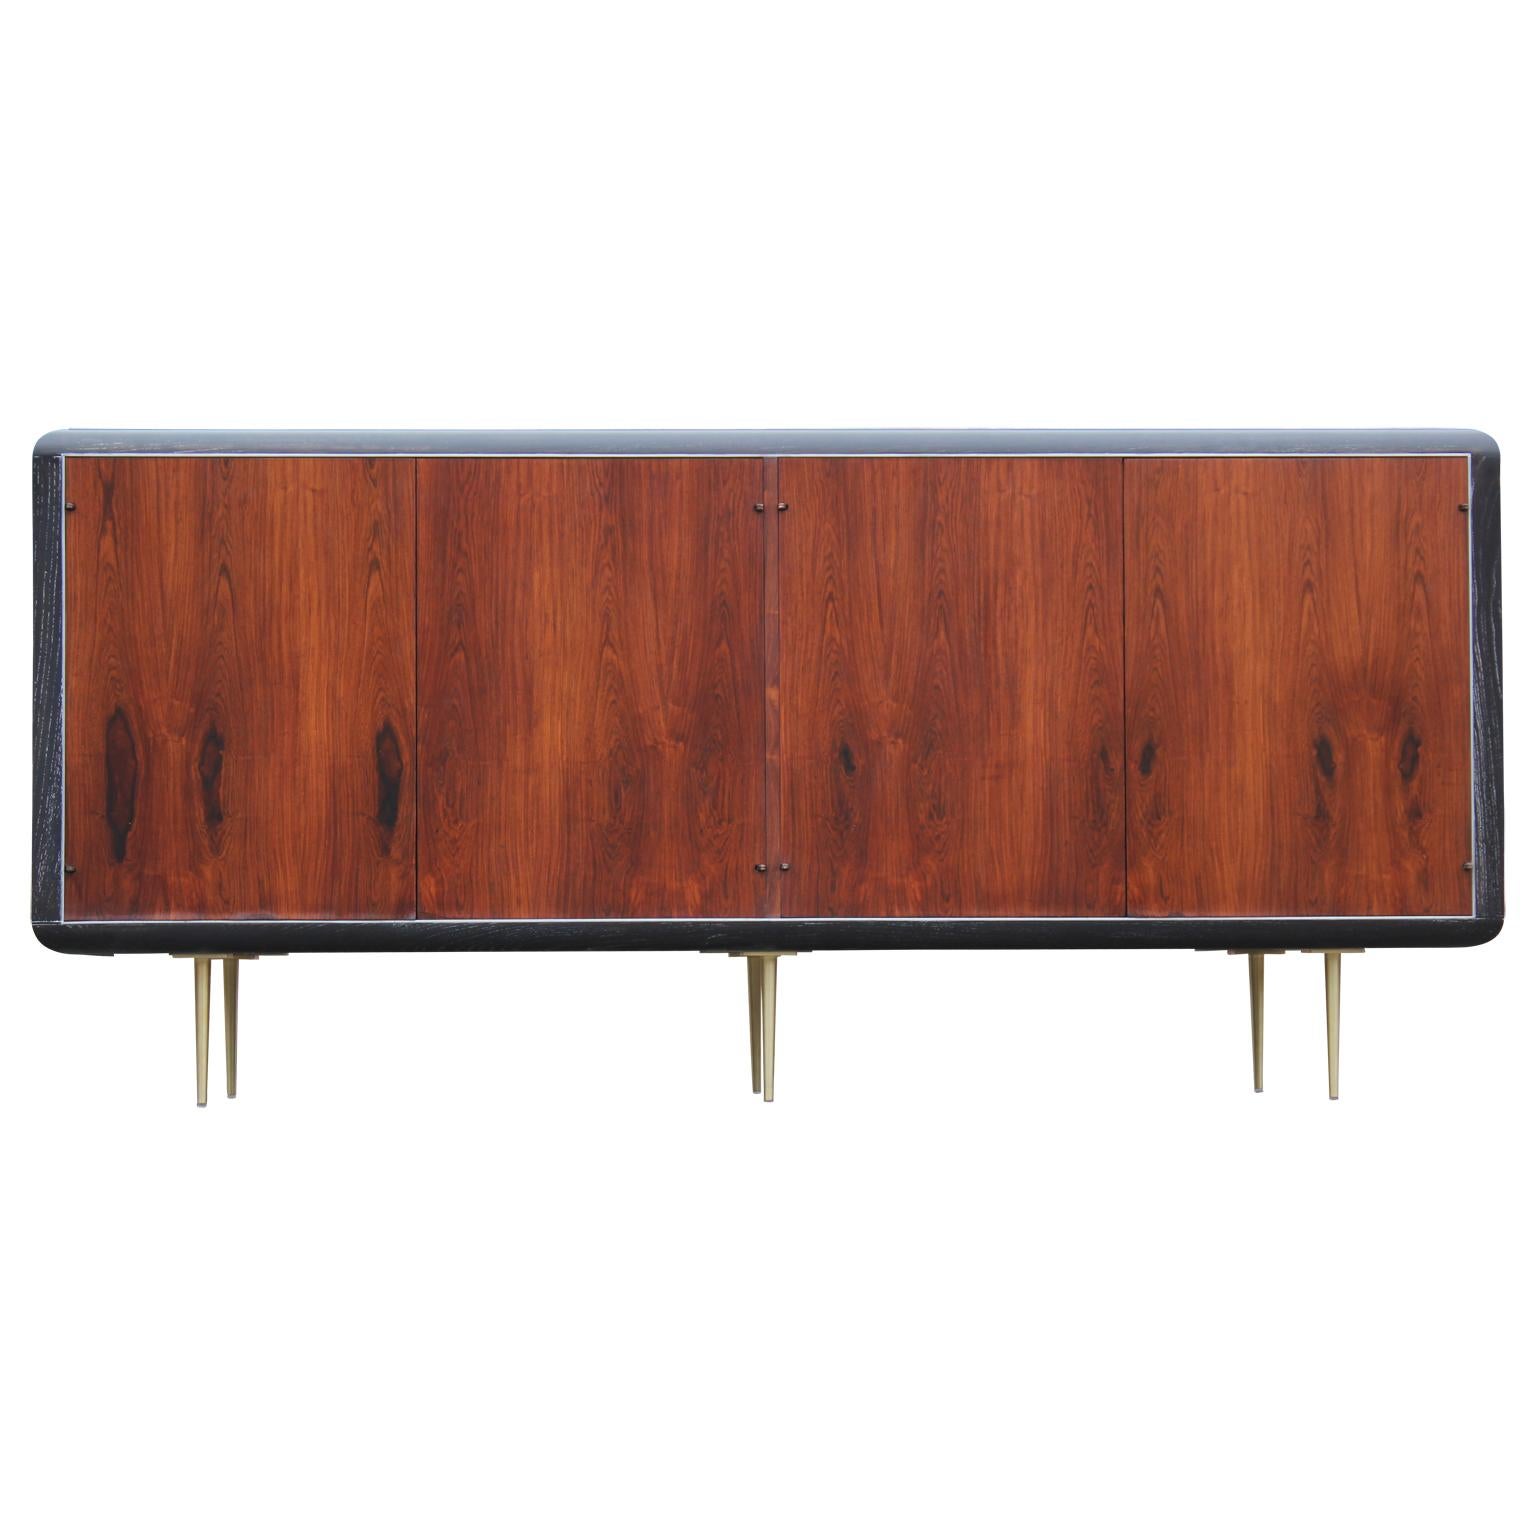 Mid-Century Modern Rosewood Brass and Chrome Sideboard or Credenza